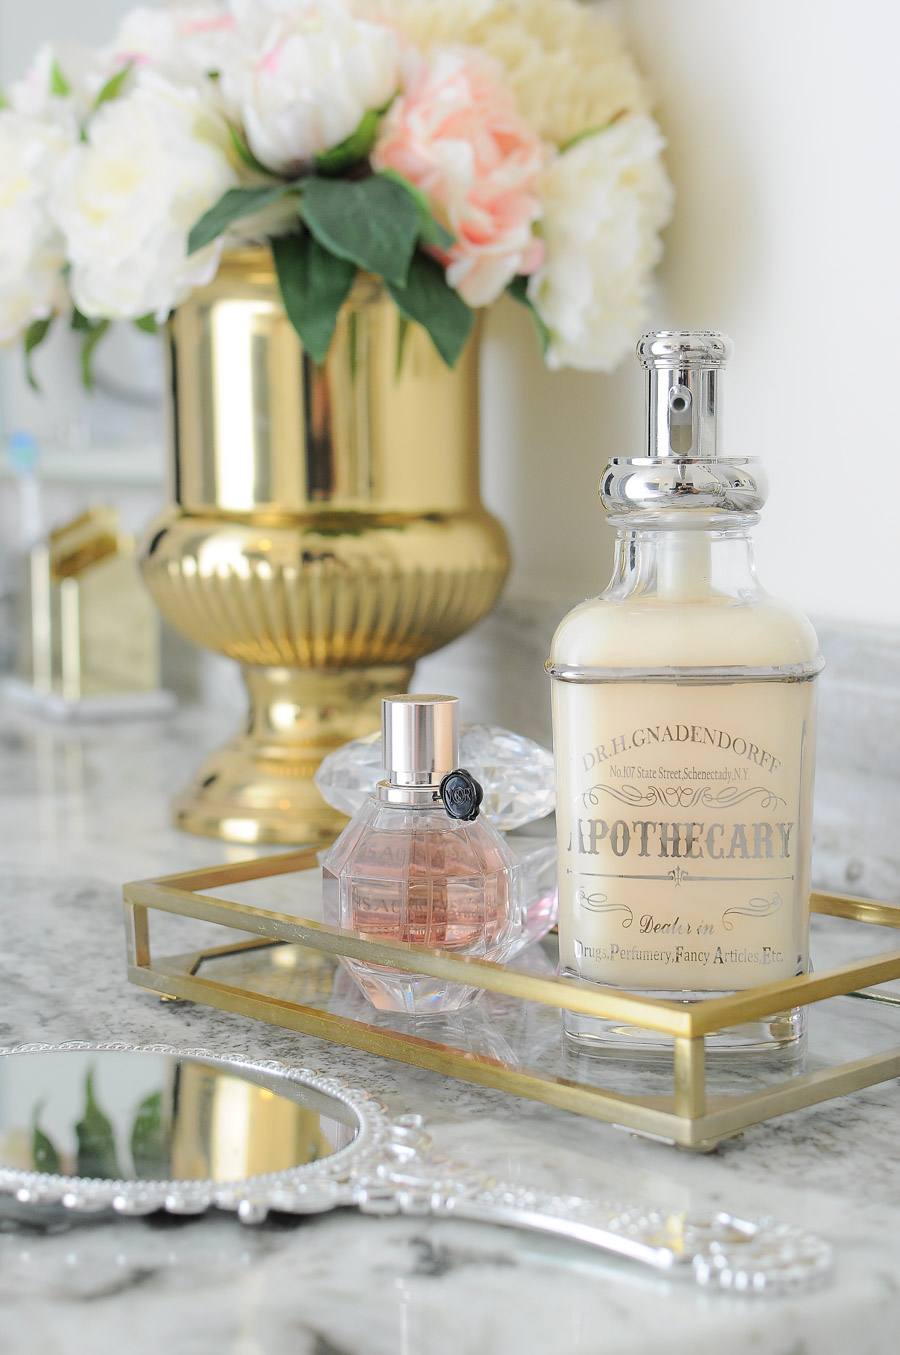 Feminine and apothecary style bathroom accents add a luxe hotel vibe to a bright white and gold master bathroom suite.